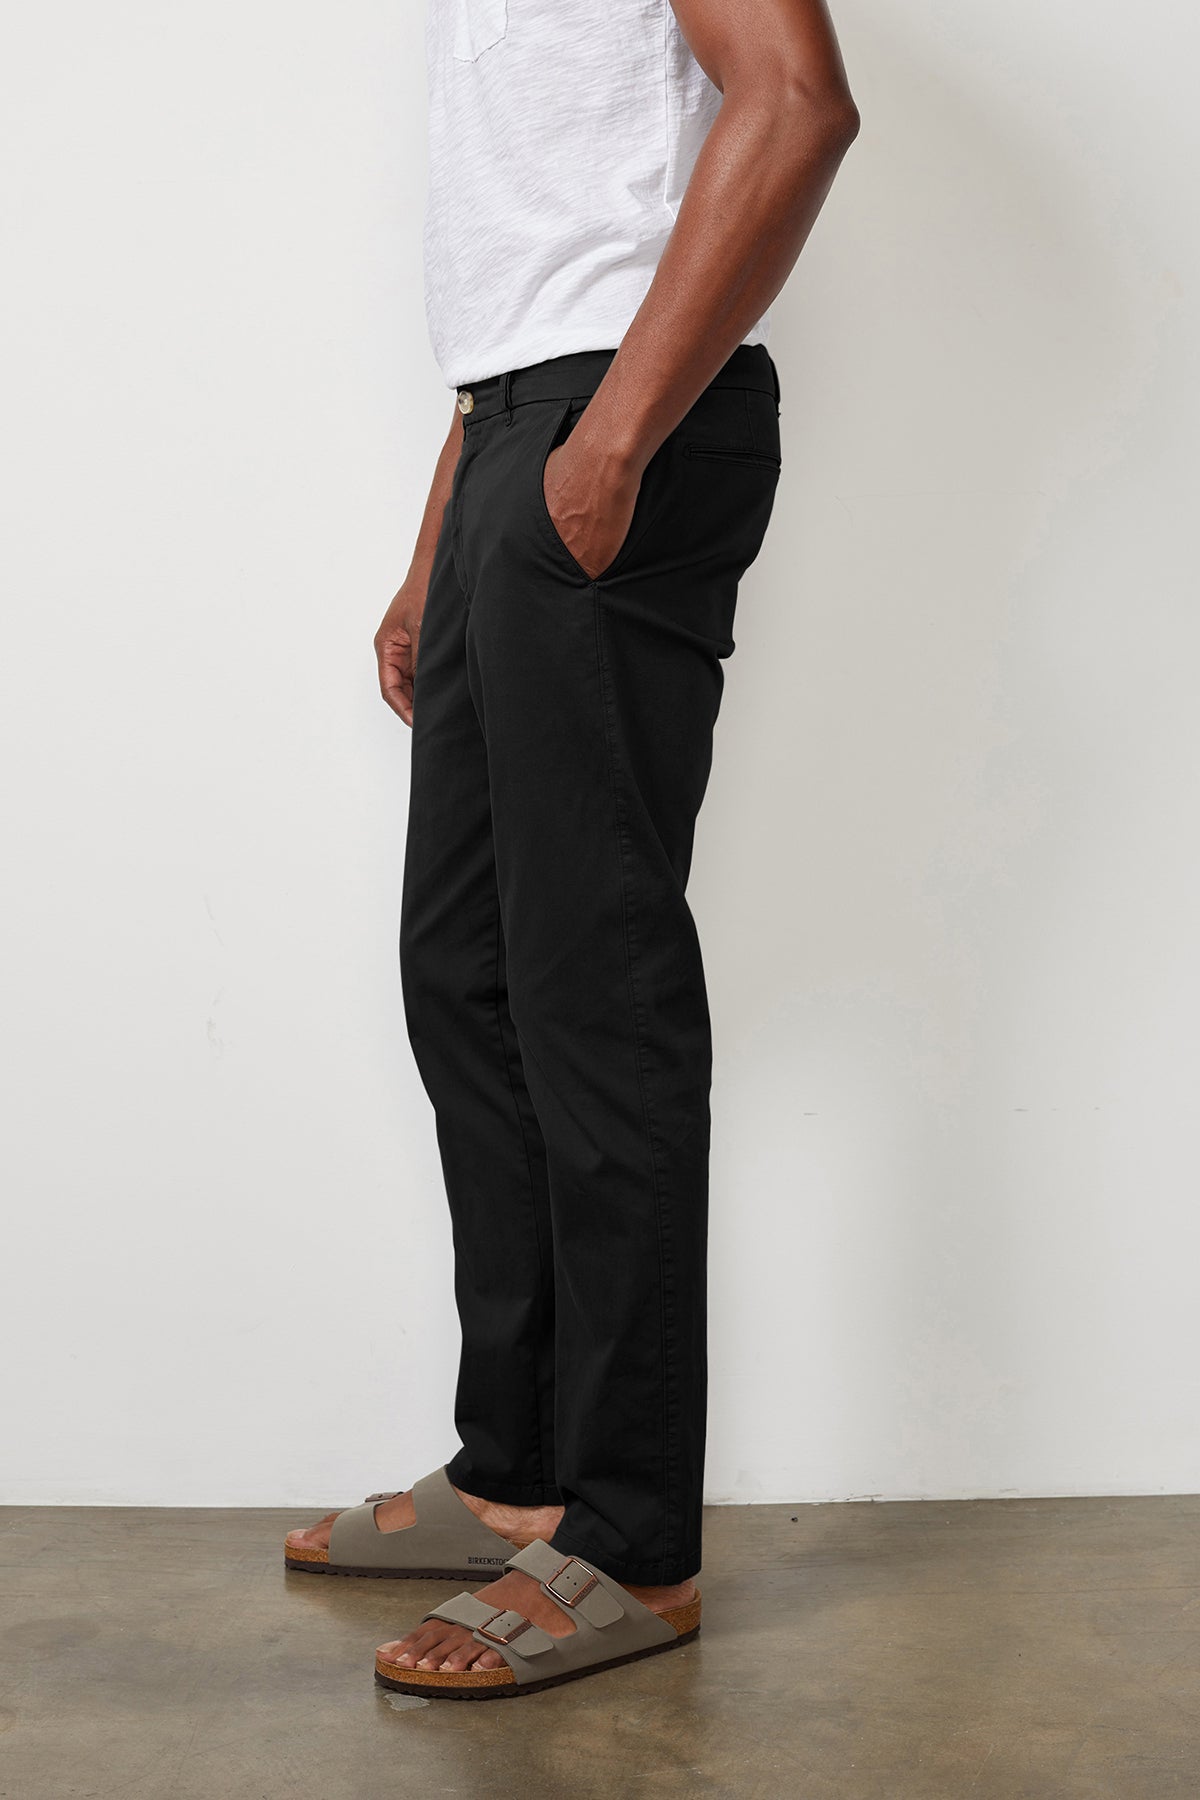   A man wearing a white t-shirt and Velvet by Graham & Spencer BROGAN COTTON TWILL PANT made of cotton twill. 